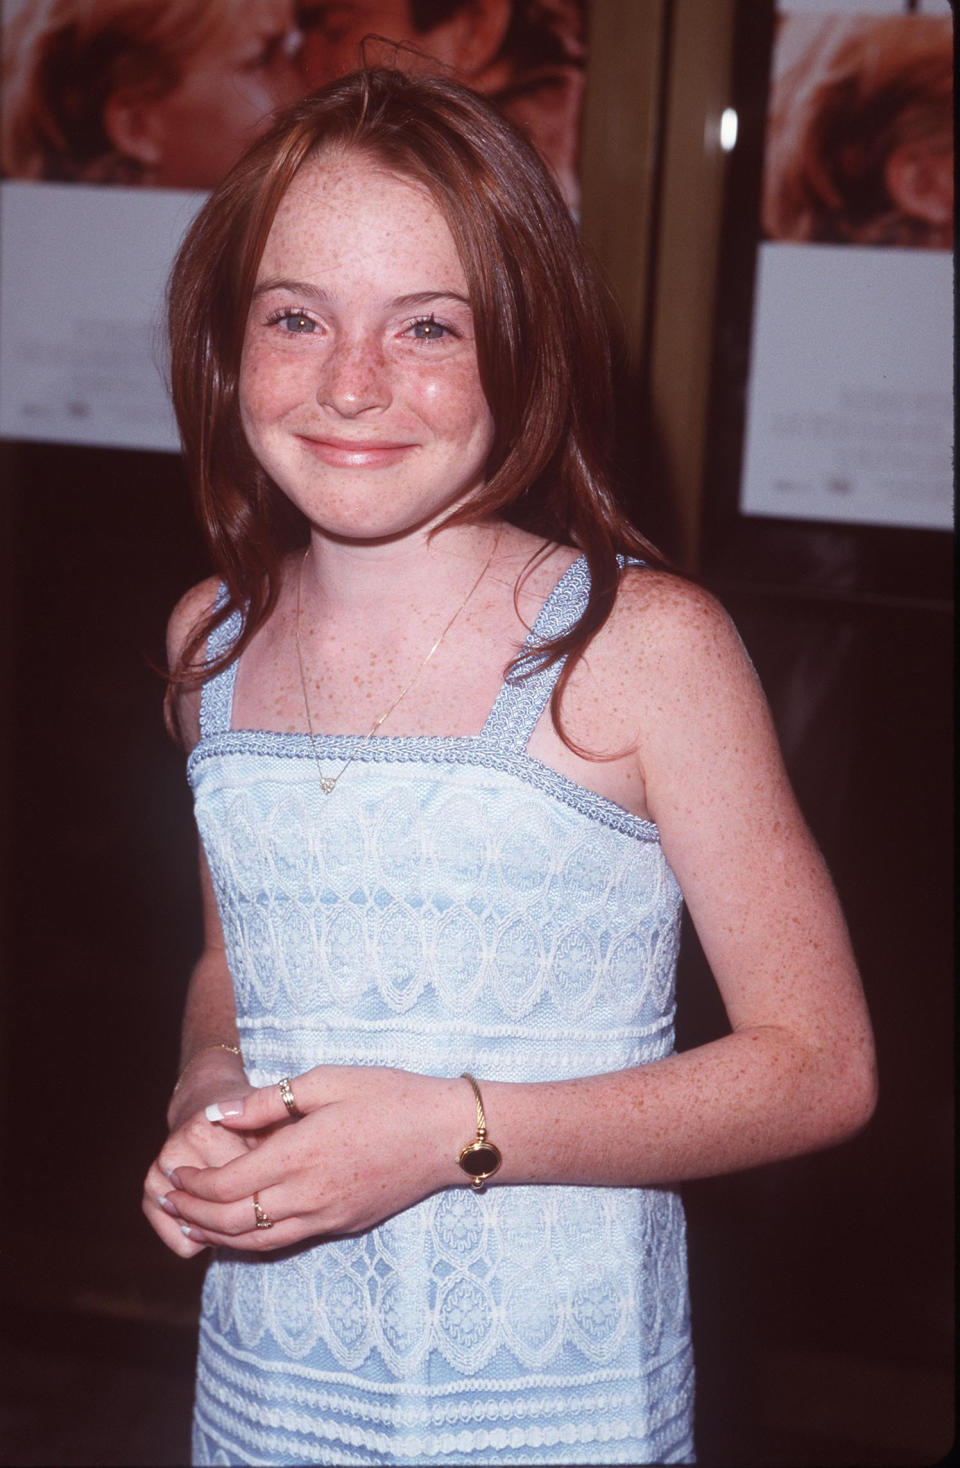 Smiling Lindsay in a sleeveless threaded dress